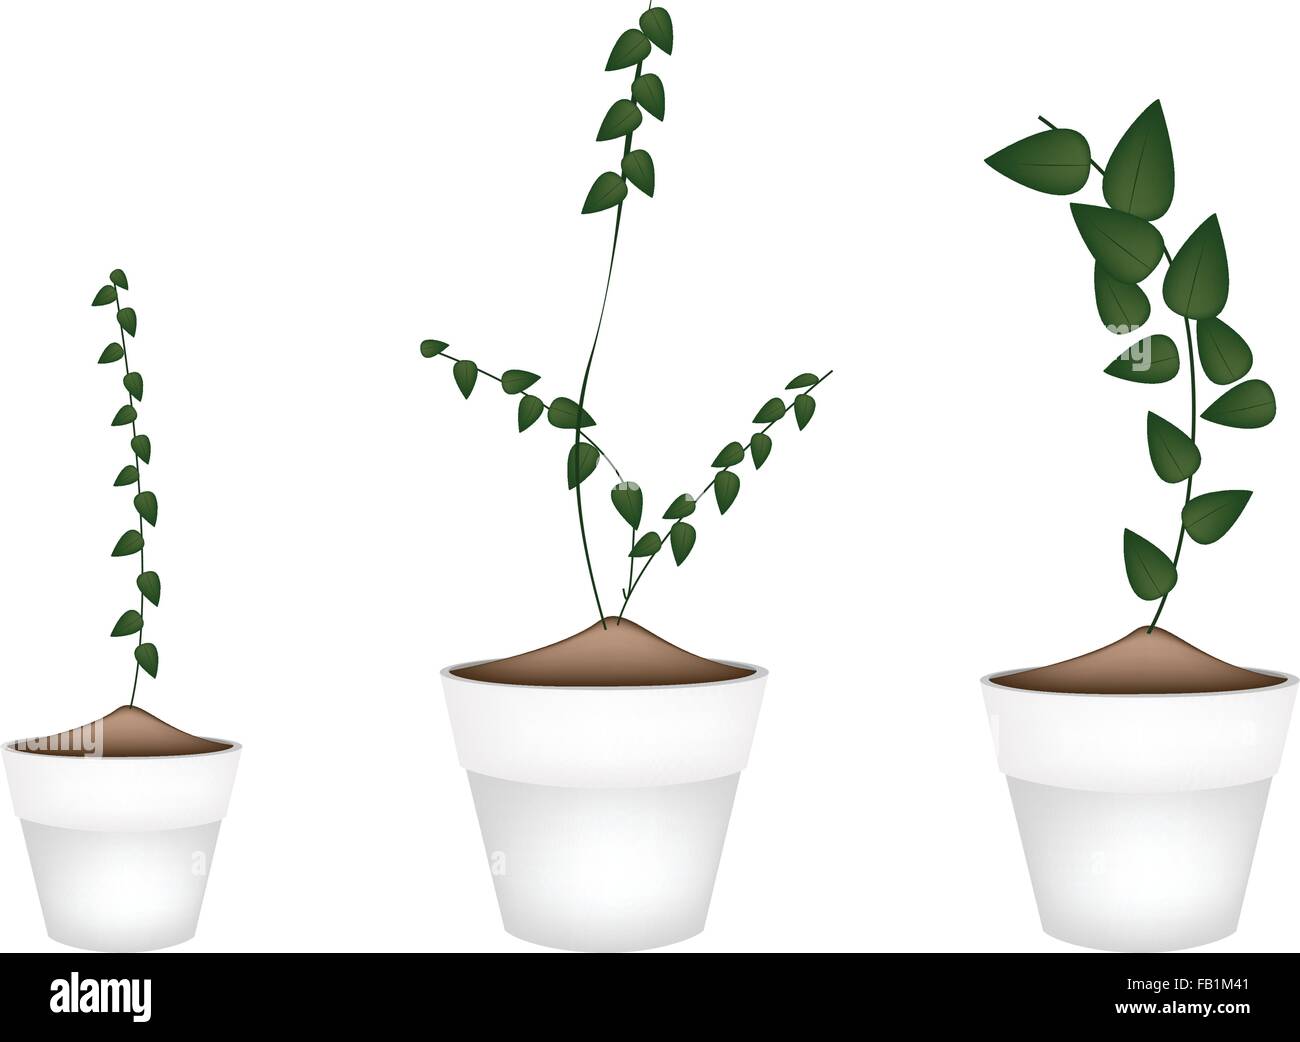 Ecological Concept, Illustration Collection of Ficus Pumila or Green Leaf Creeper Wall Plant in Terracotta Flower Pots for Garde Stock Vector